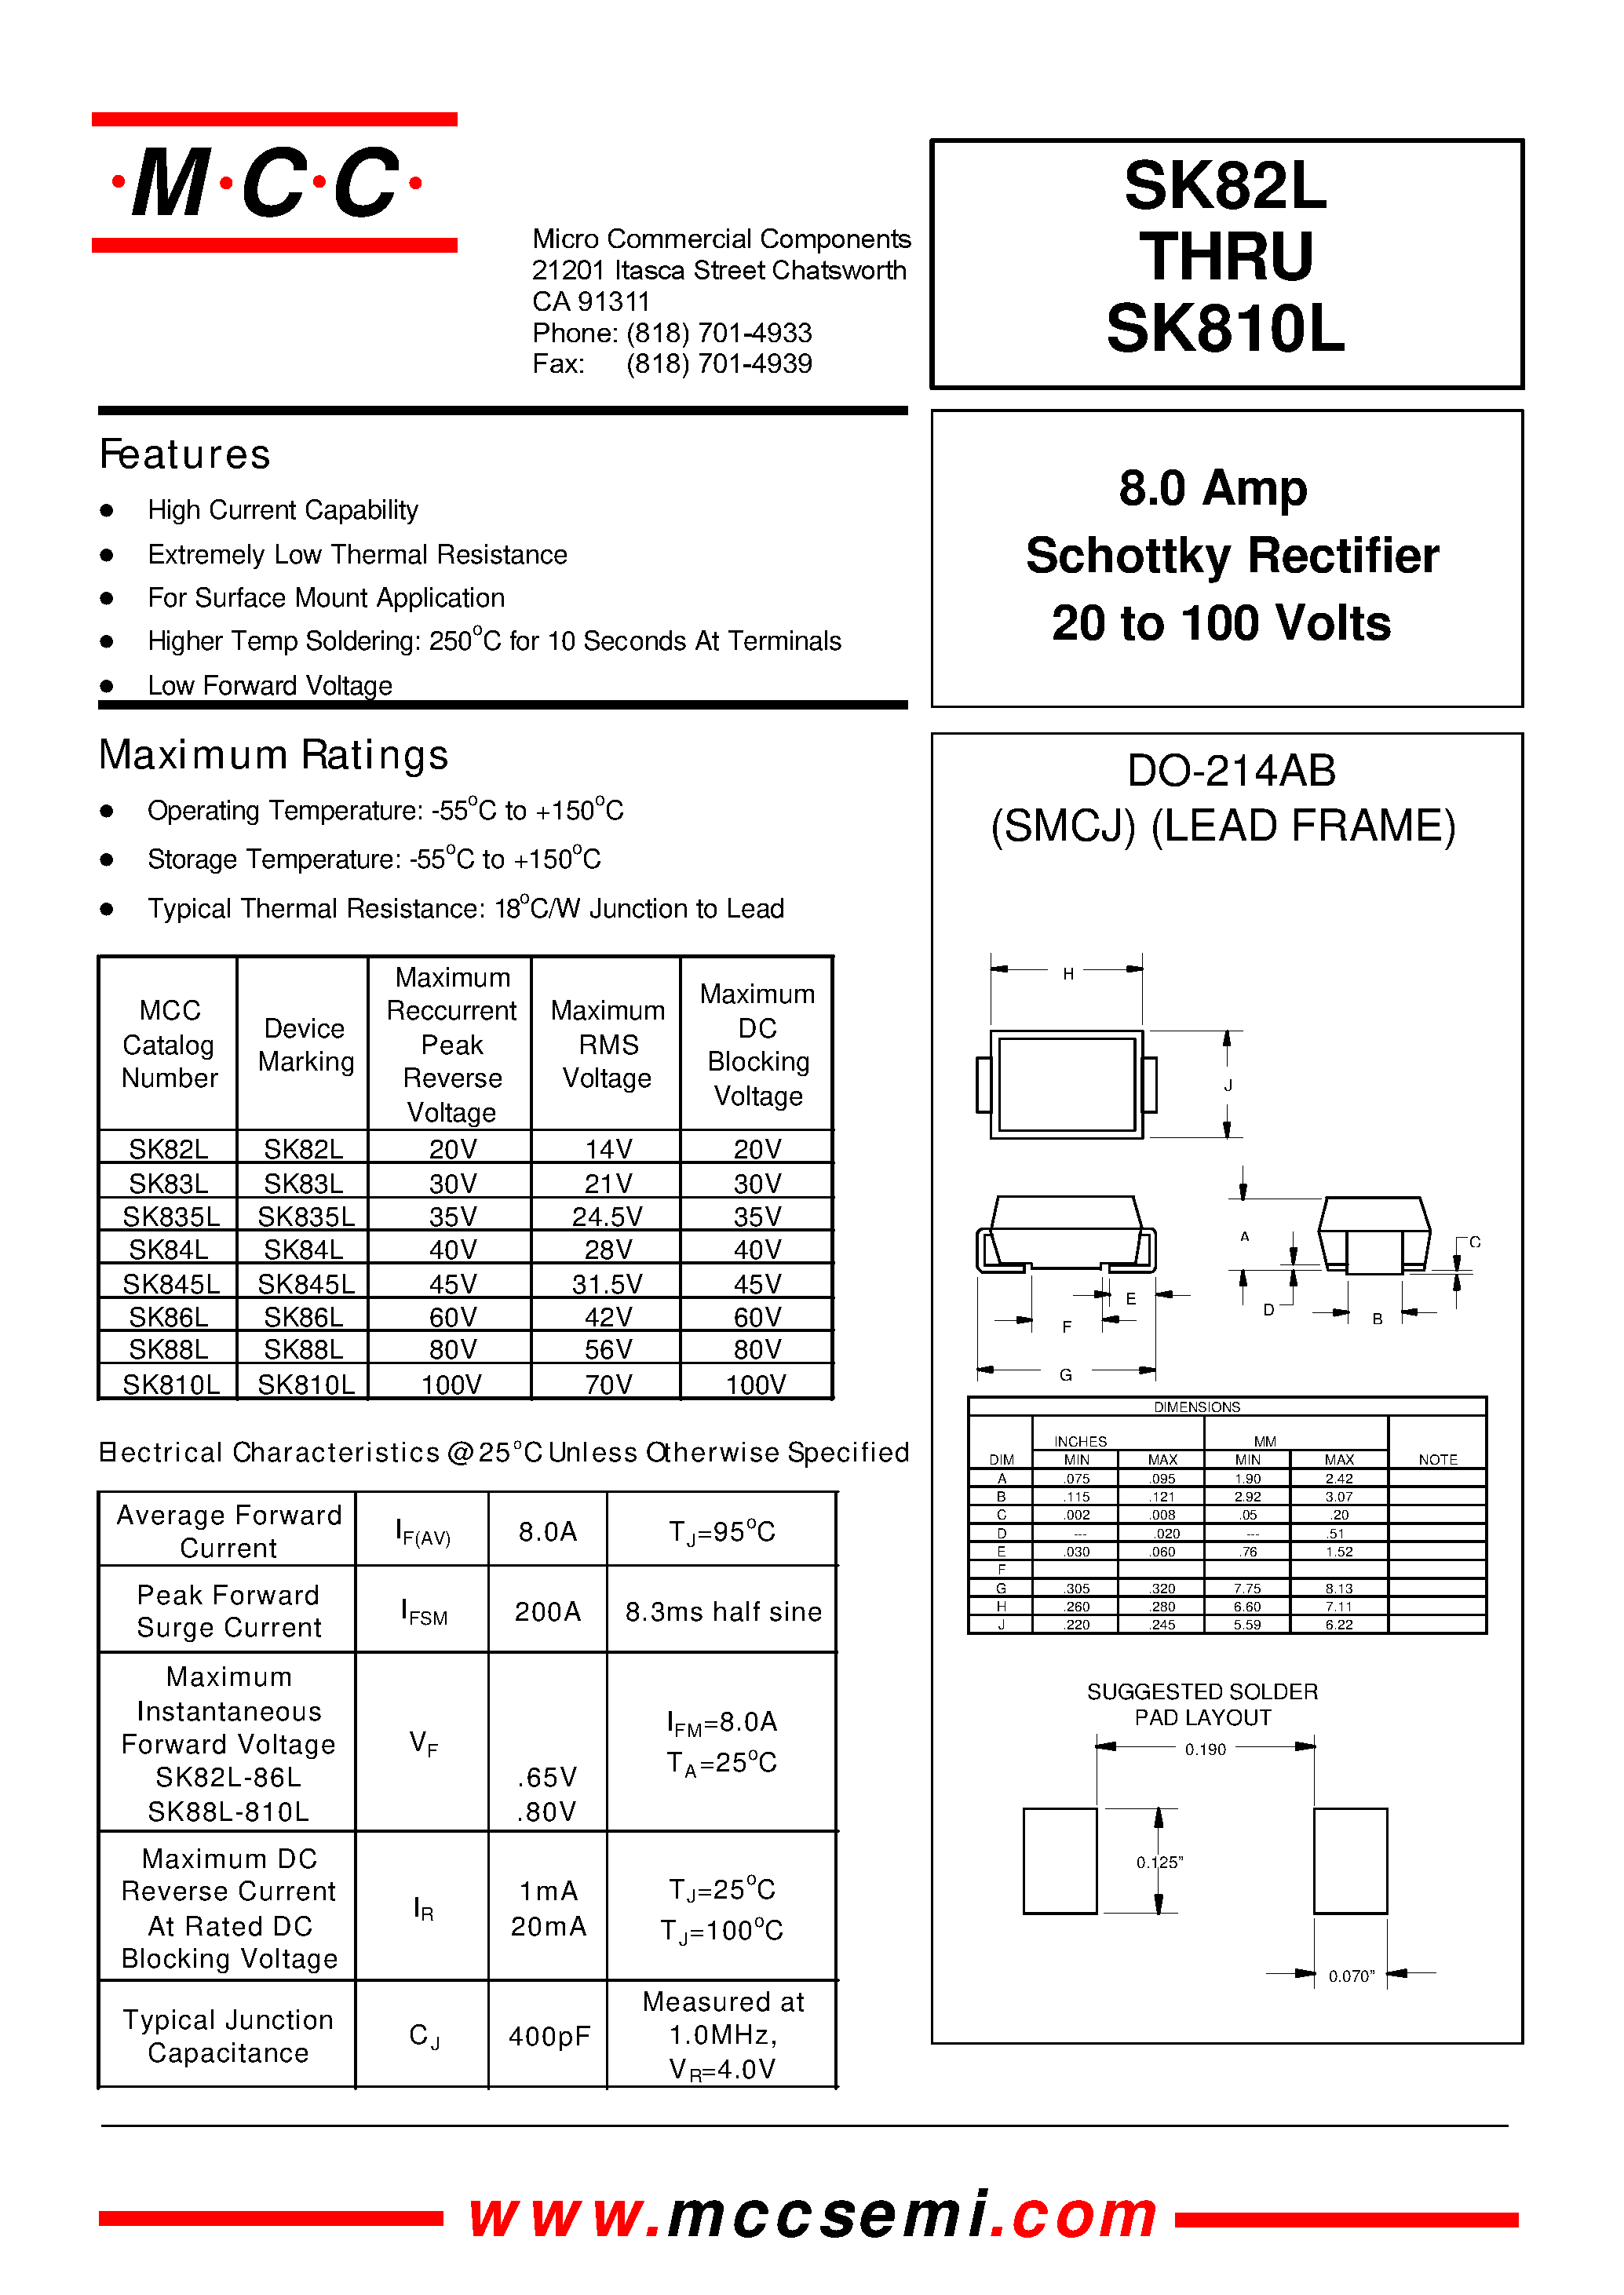 Datasheet SK845L - 8.0 Amp Schottky Rectifier 20 to 100 Volts page 1